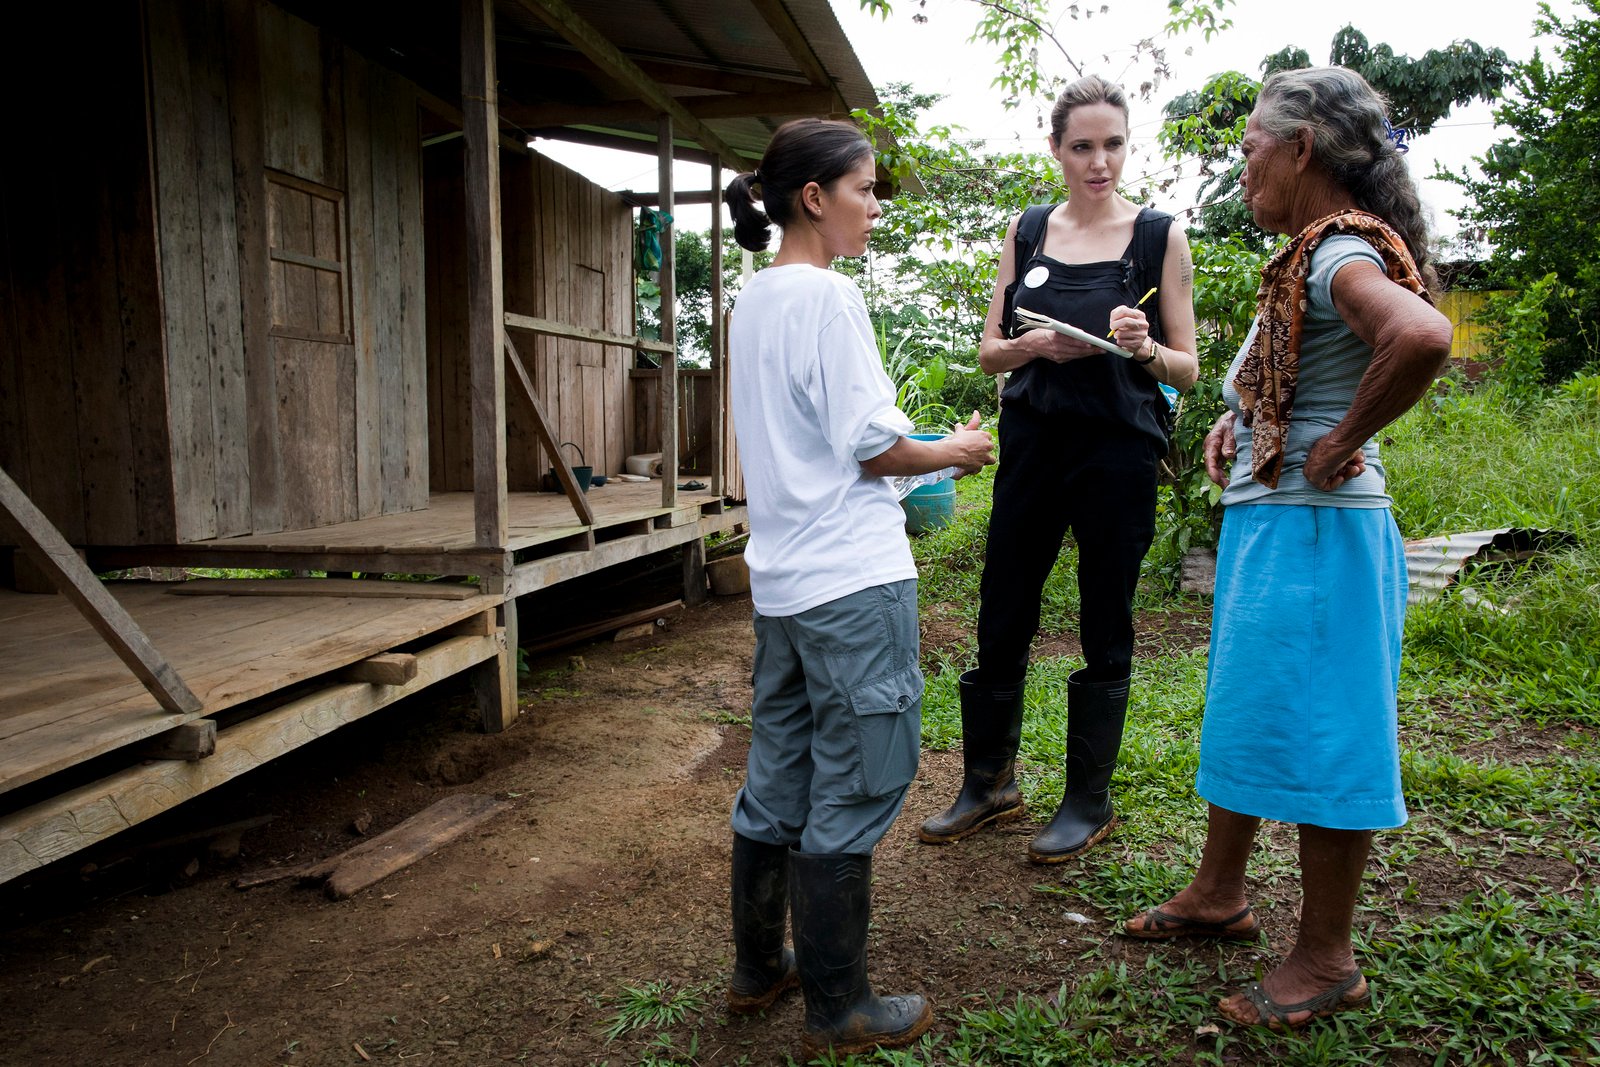 UNHCR Special Envoy Angelina Jolie meets 71-year-old Gerardina in the village of Barranca Bermeja, a remote refugee community on the banks of the San Miguel River, which marks Ecuador's border with Colombia.